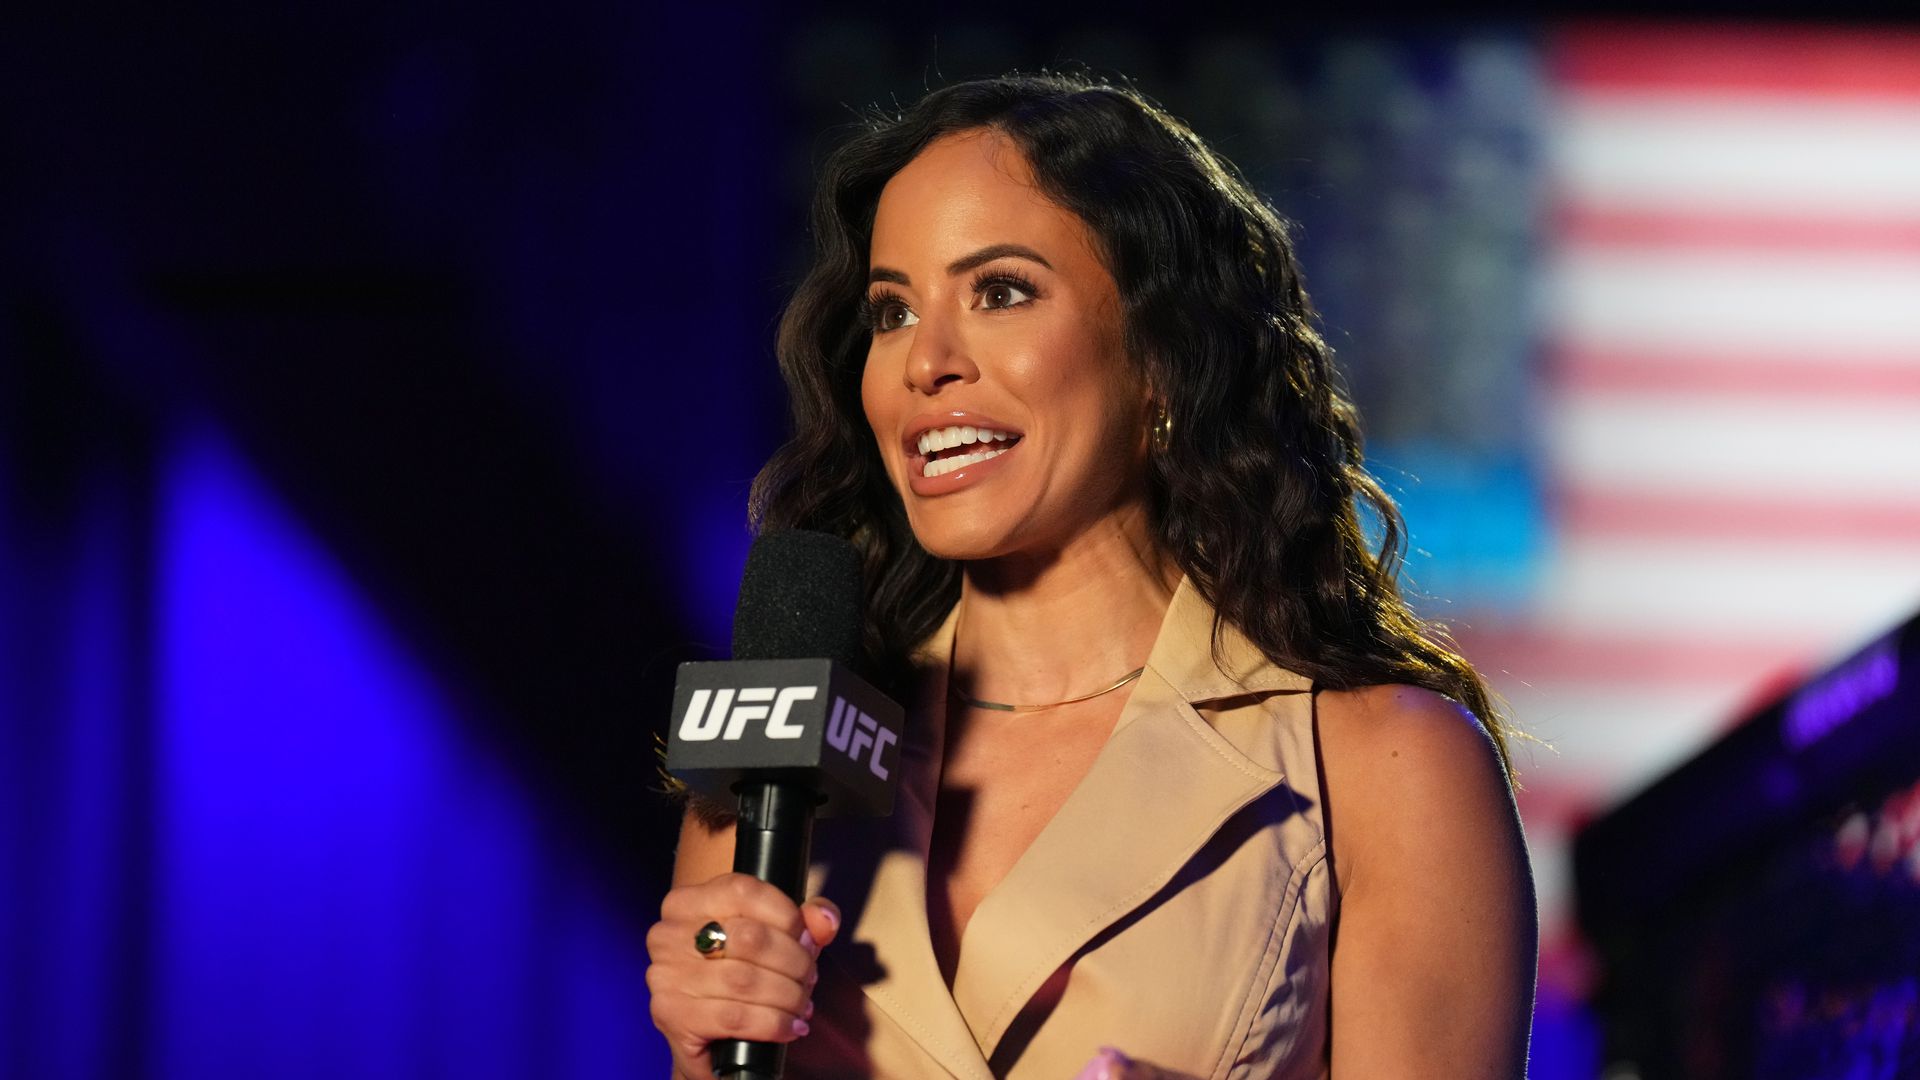 charly arnolt becomes first female ufc ring announcer after temporarily replacing ailing joe martinez